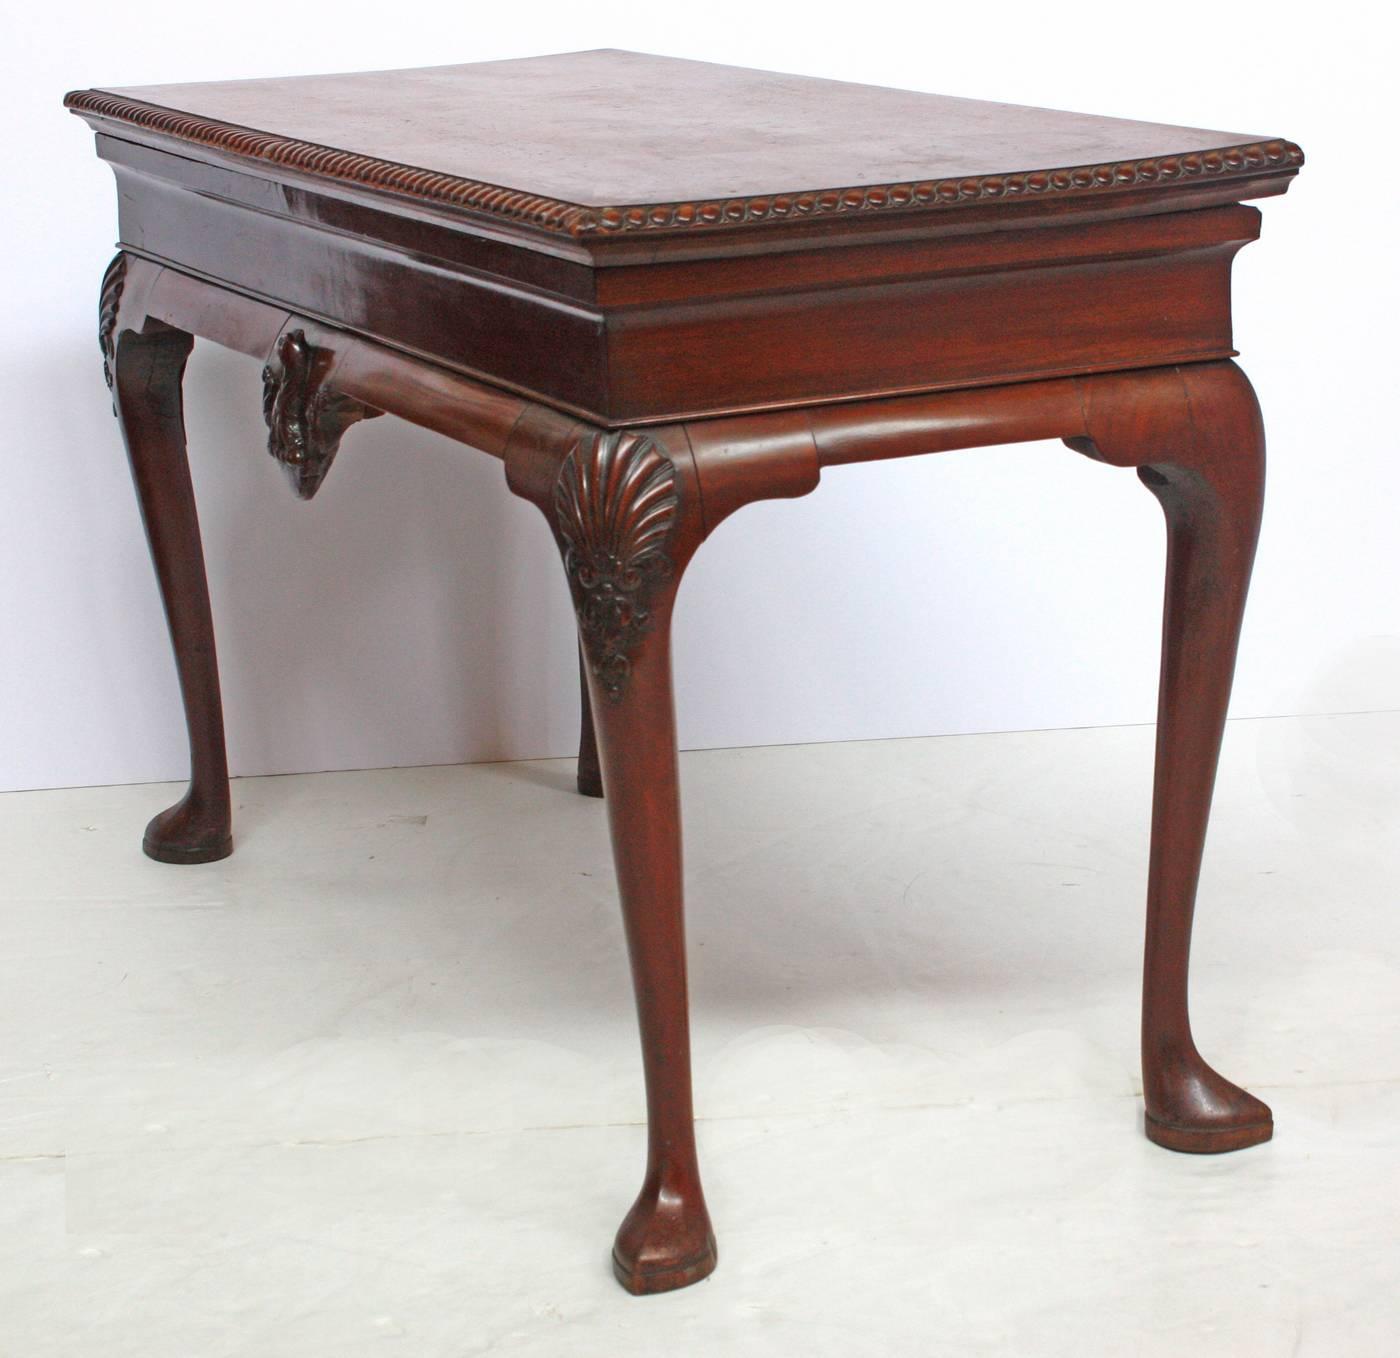 A period Irish / George II mahogany slab / serving table with armorial crest decoration (a cock's head erased) on the center of the apron having a gadrooned edge top (later replacement of missing / lost original marble slab top), slight cabriole